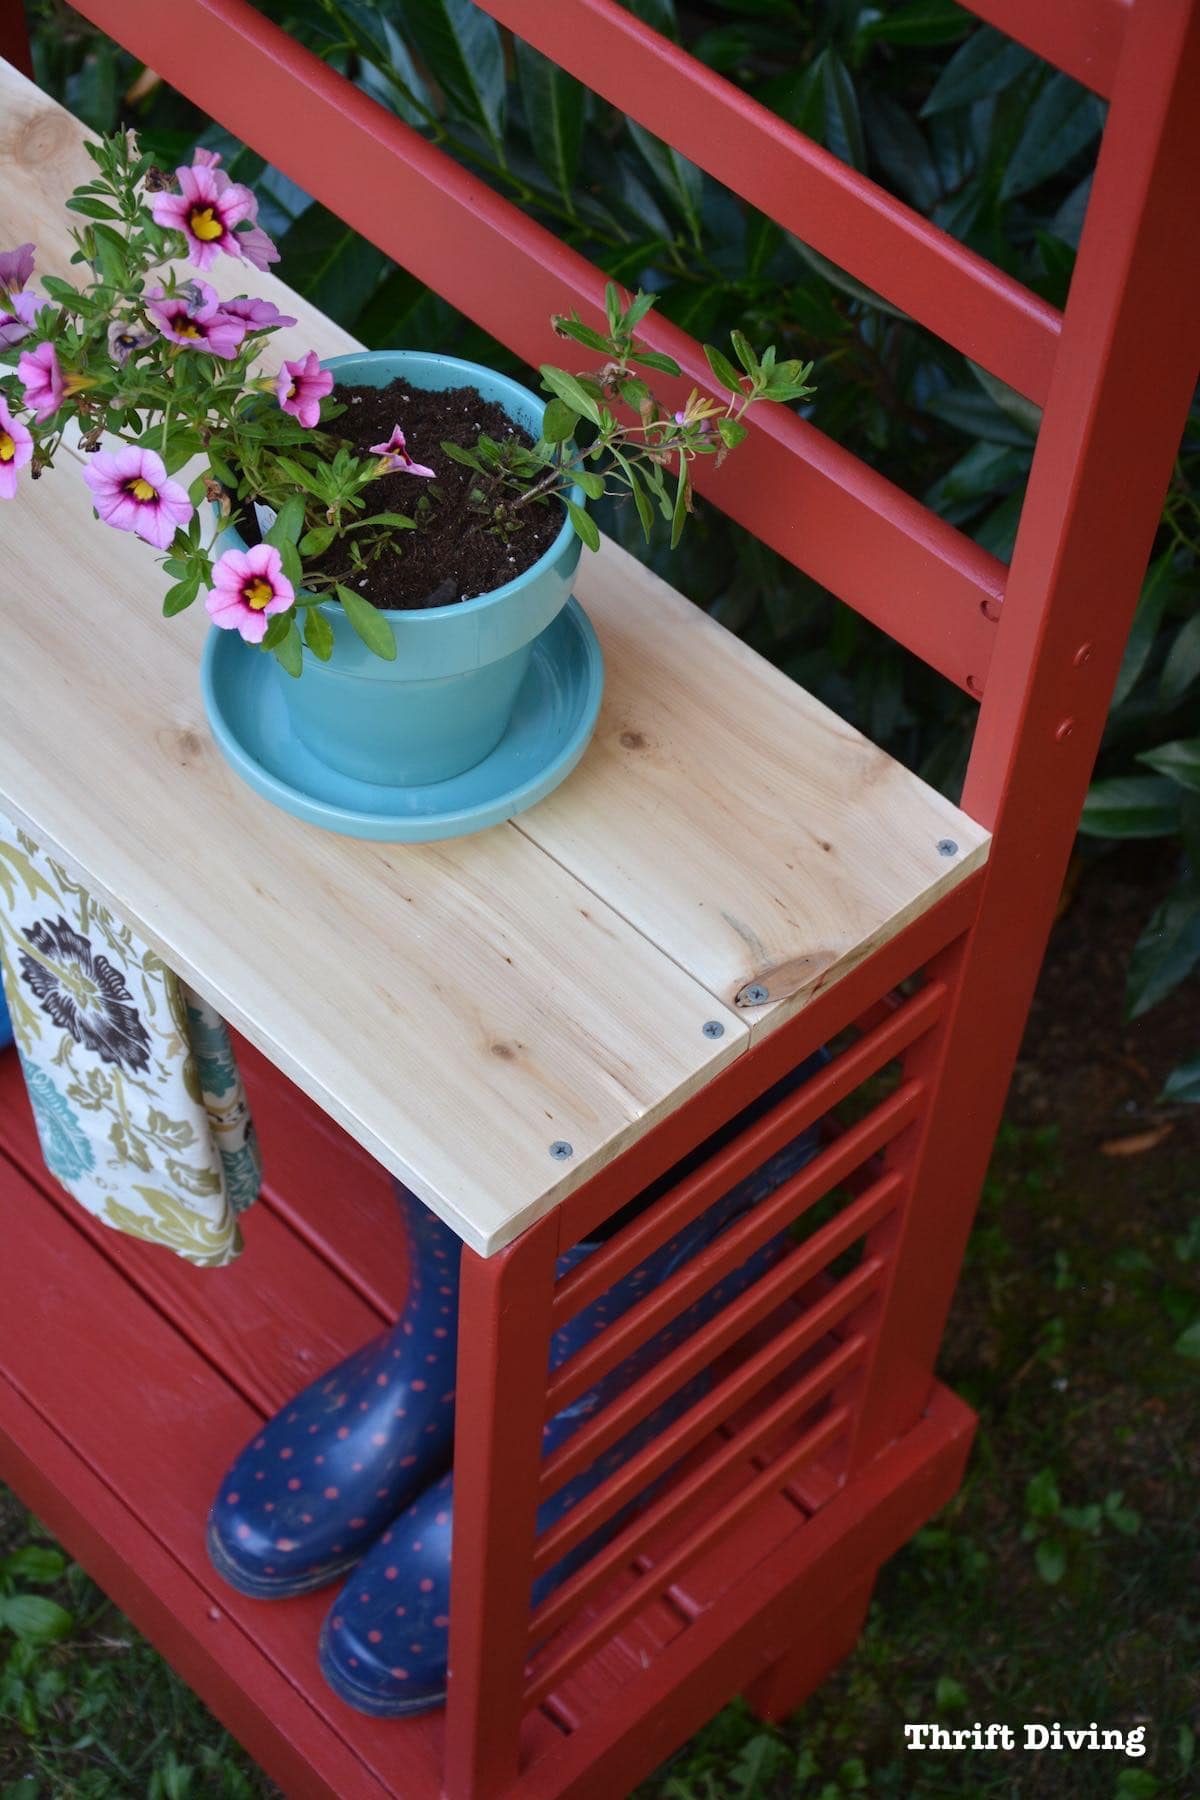 Repurposed toddler bed: What to do with an old toddler bed - Turn a toddler bed into a garden bench for your yard.- With flowers and a cedar shelf - Thrift Diving